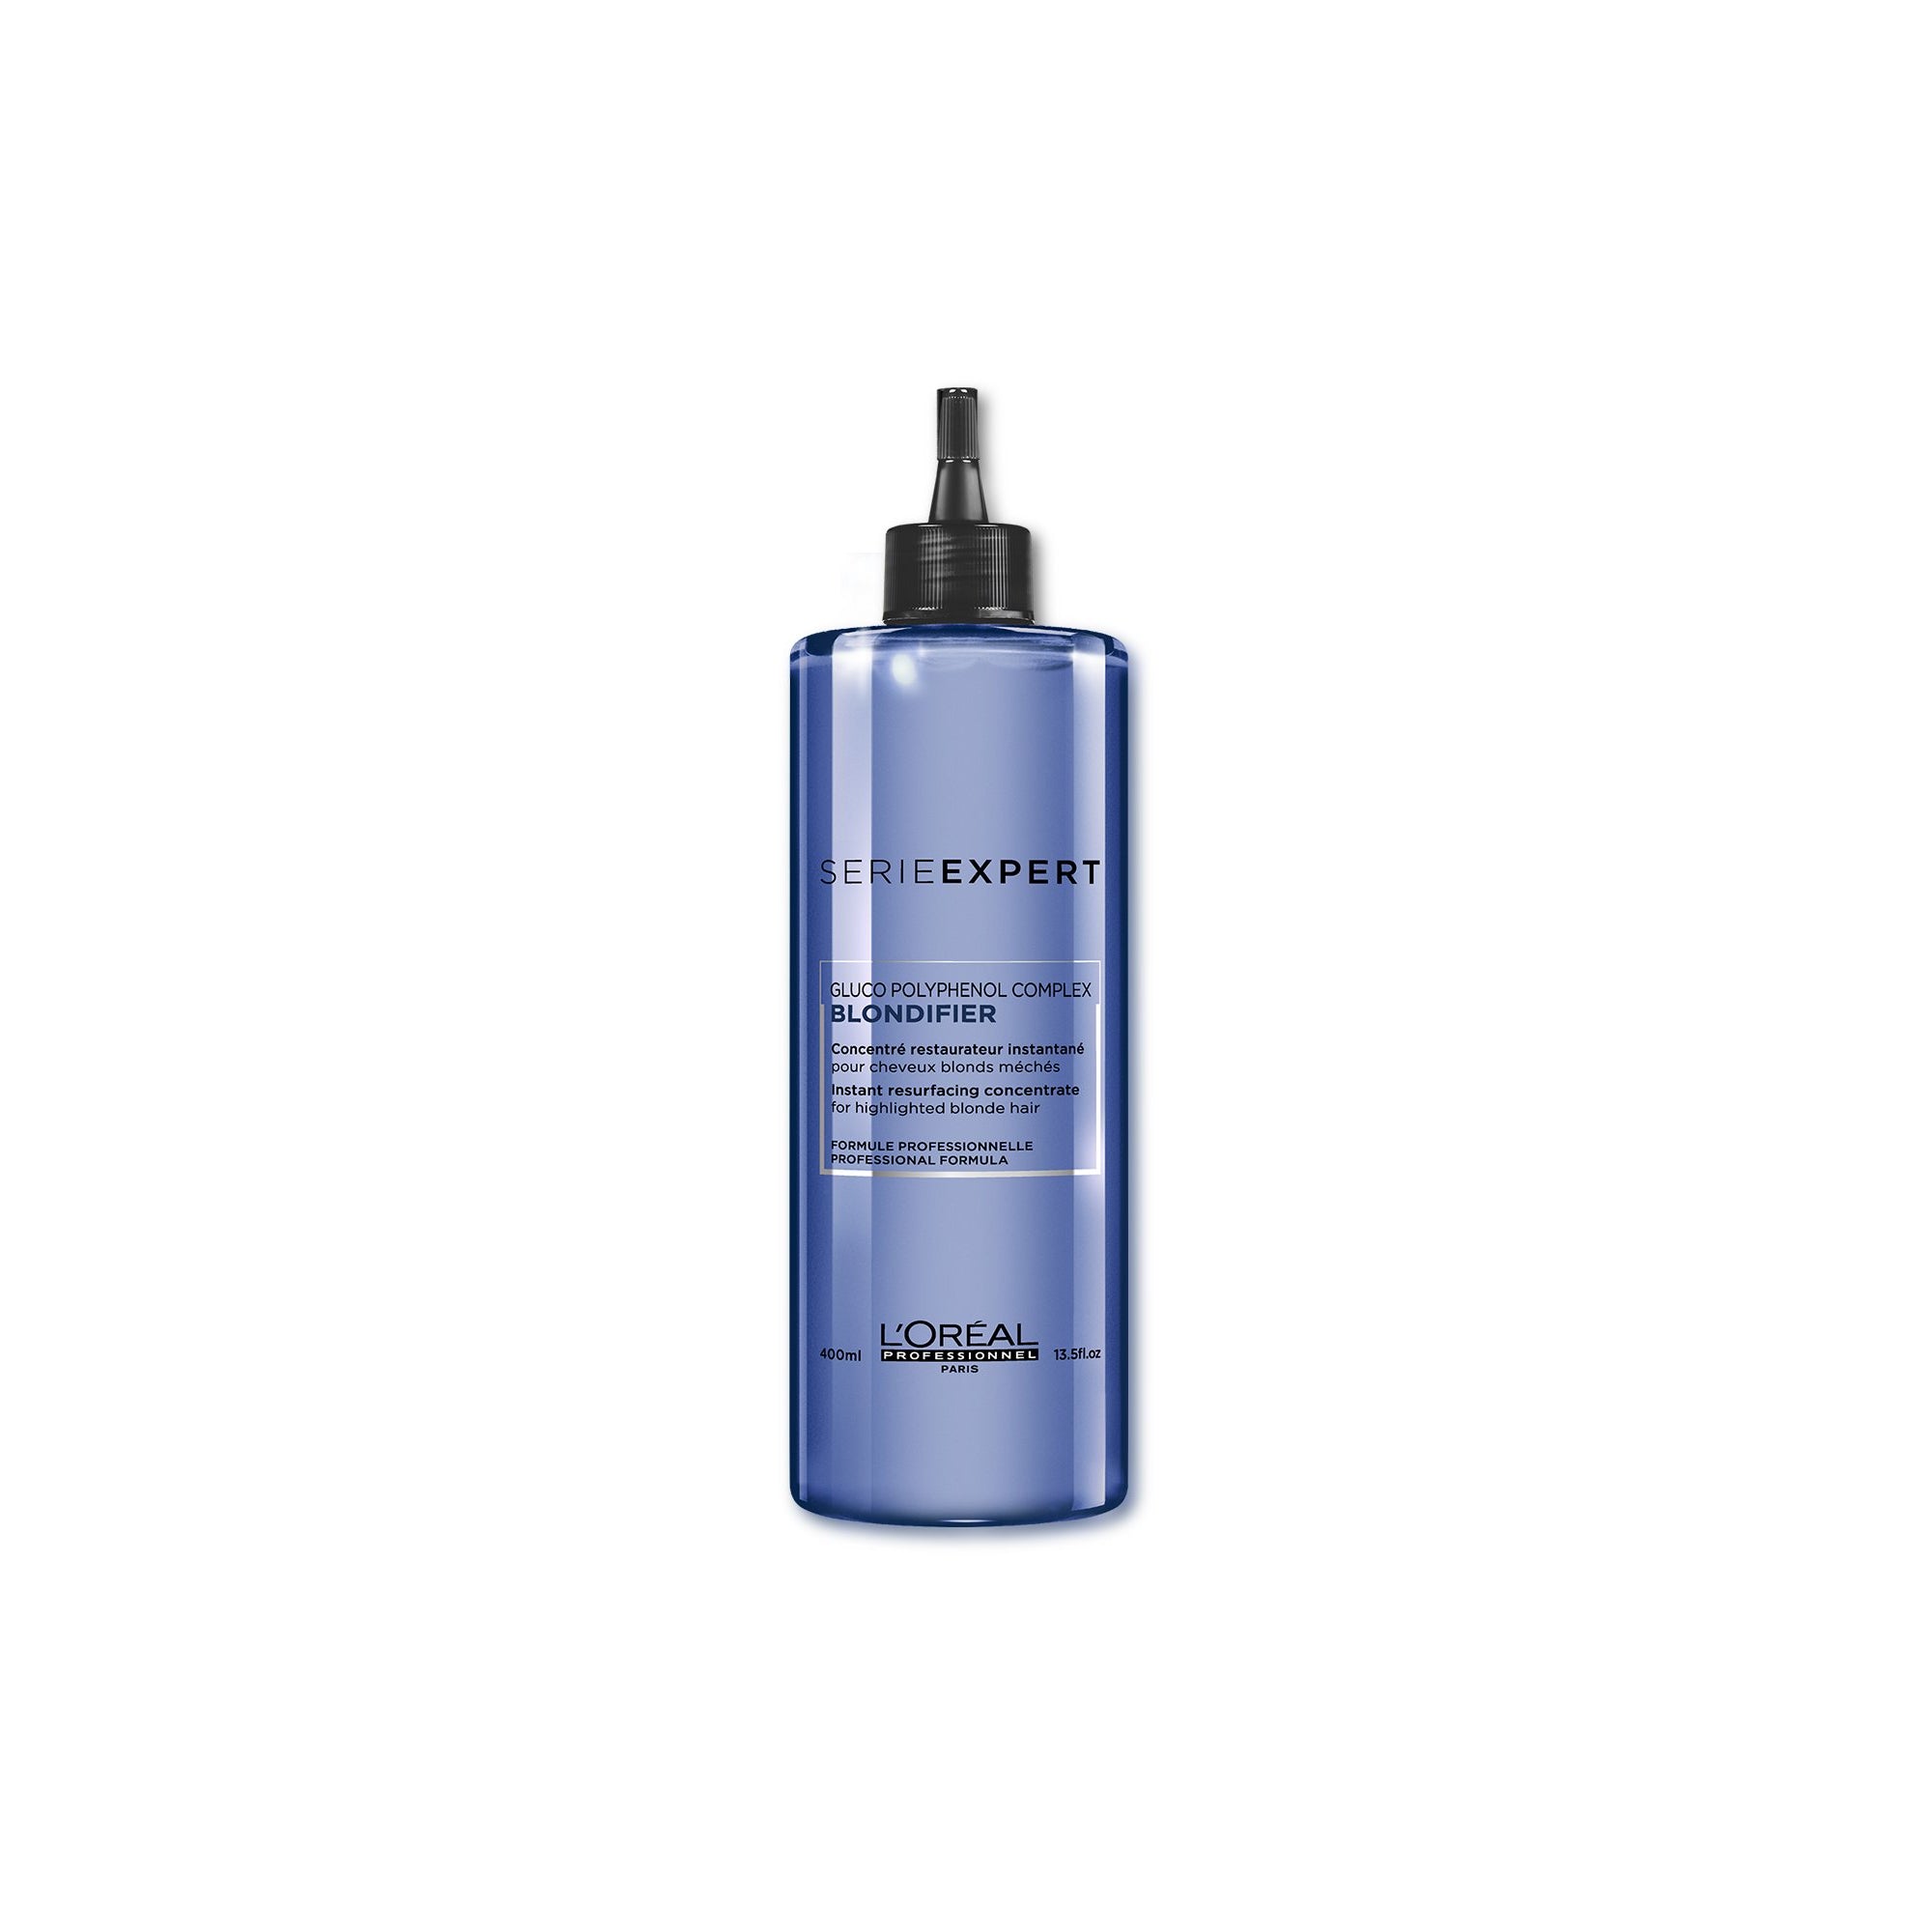 L'oreal Professionnel Serie Expert Blondifier Instant Resurfacing Concentrate 400ml